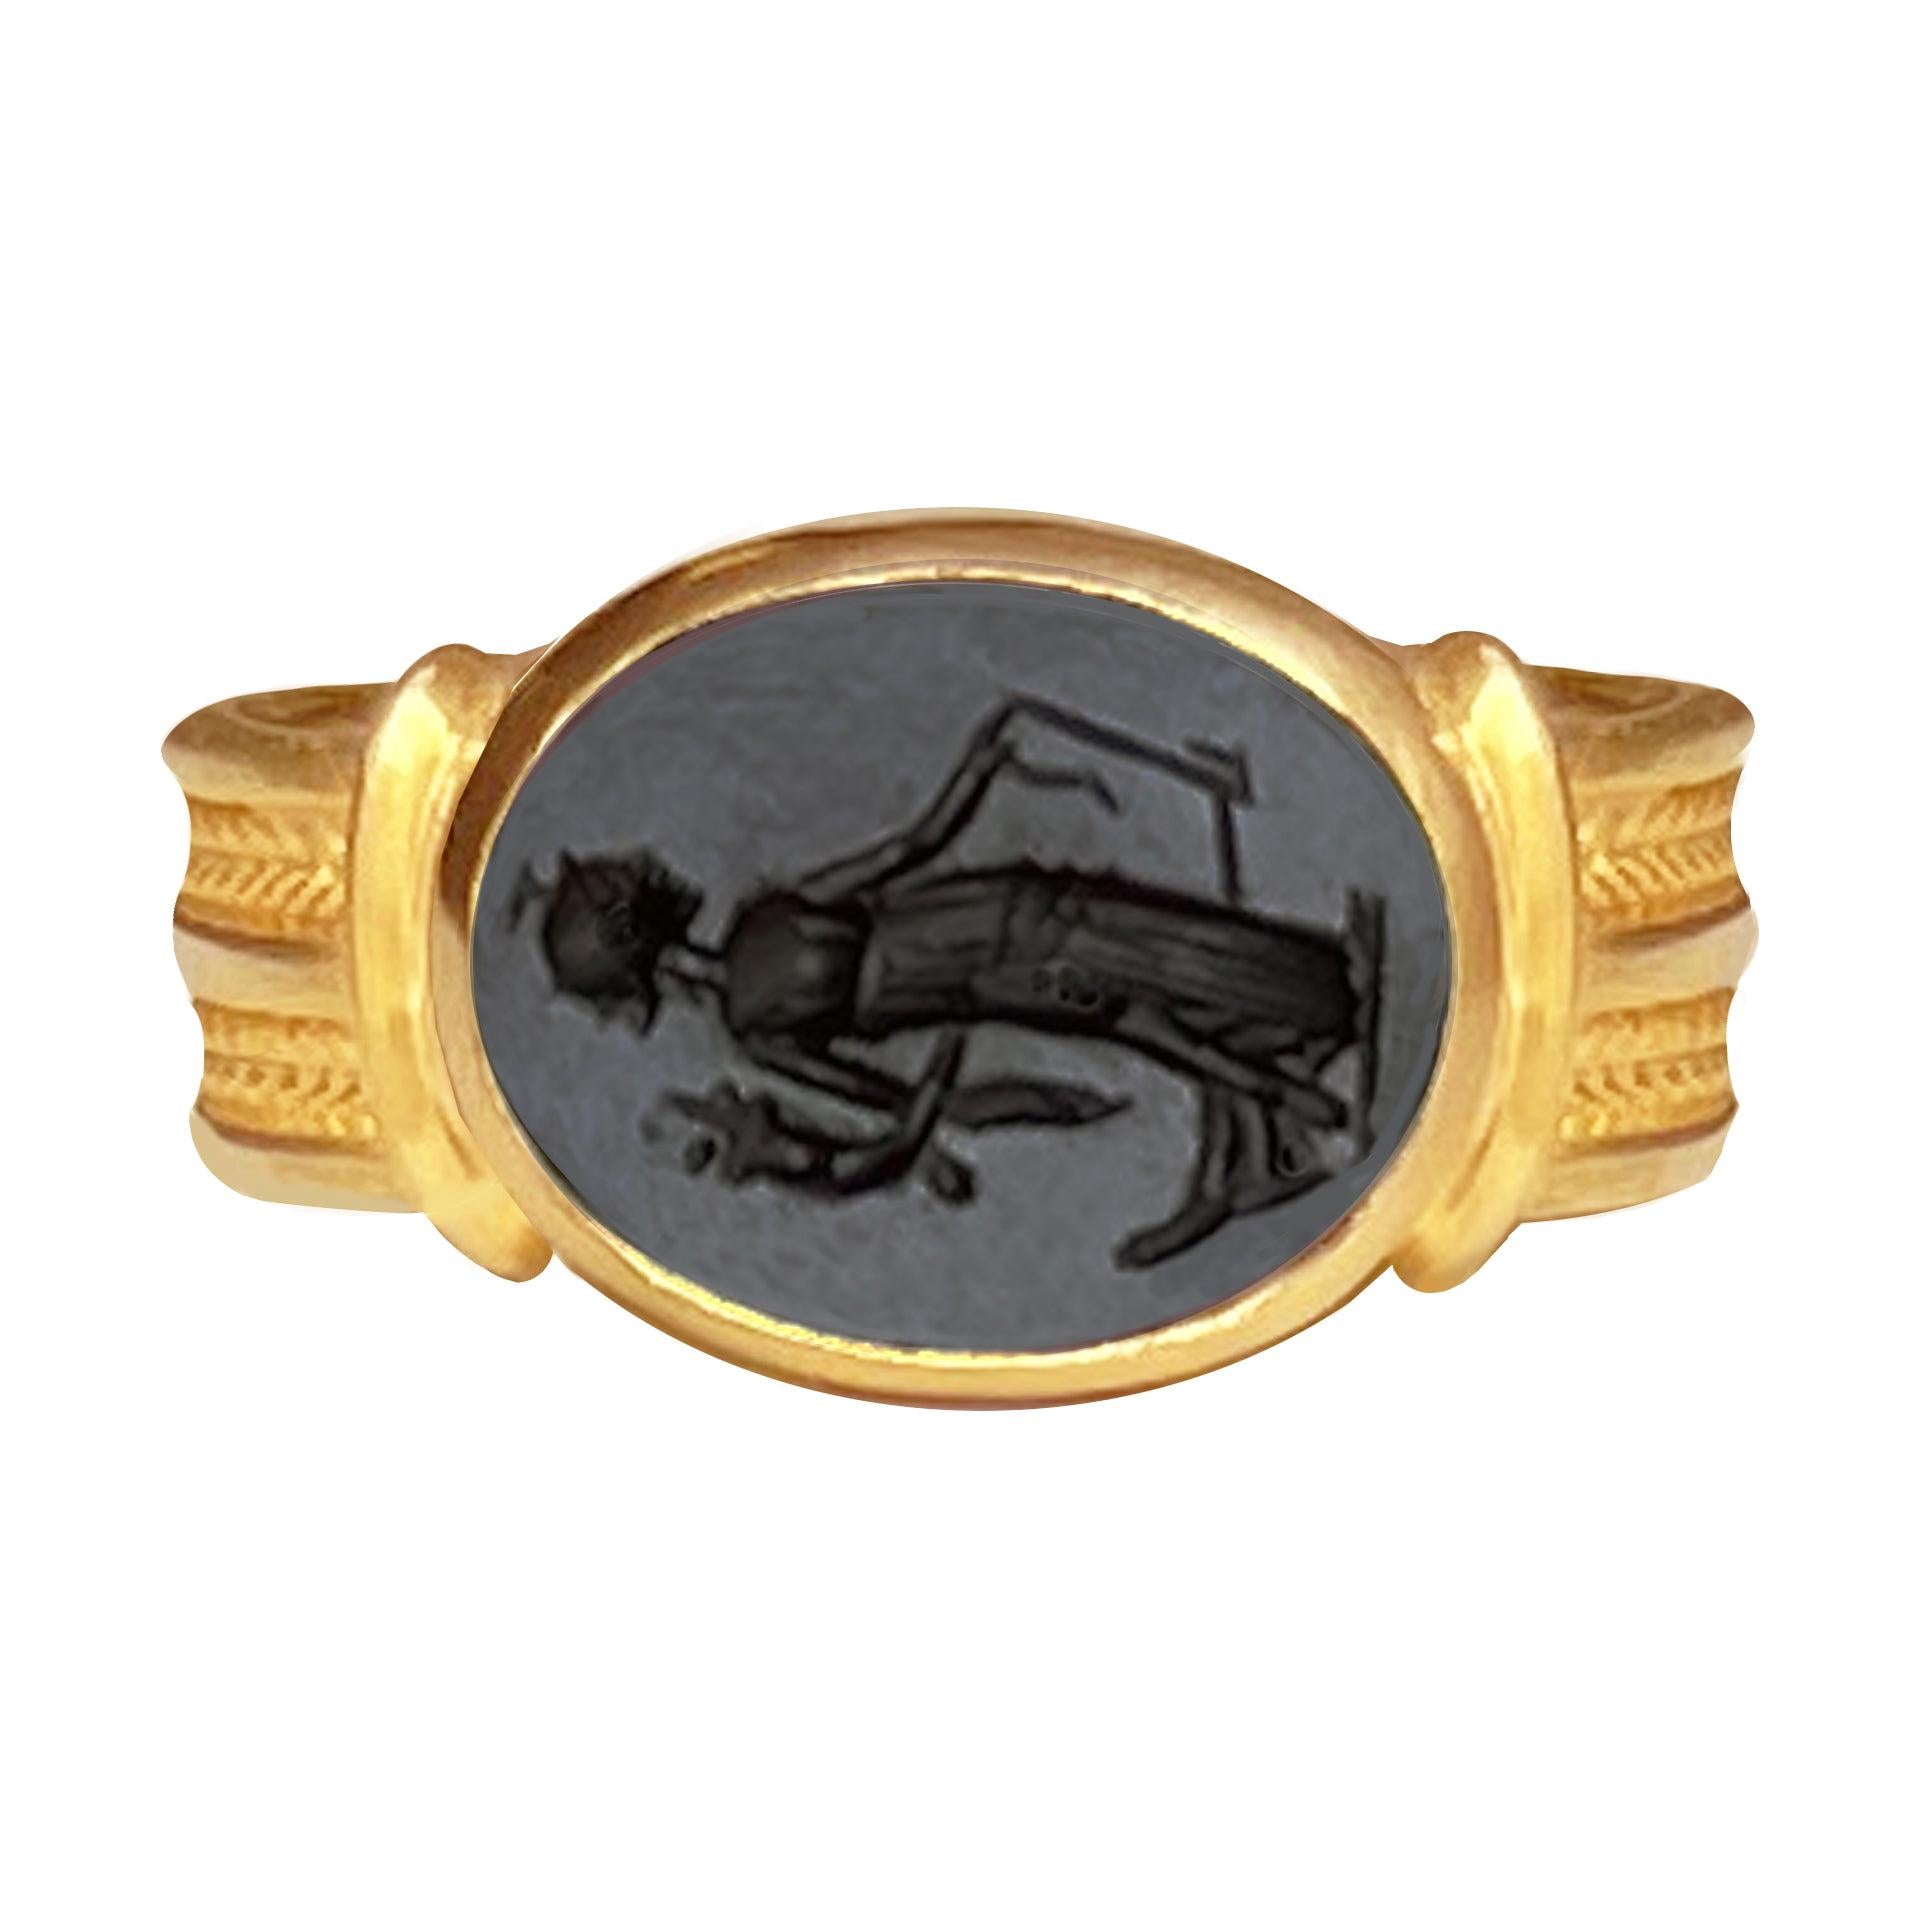 Roman Onyx Intaglio Gold Ring Depicting a Fortune with Horn of Plenty and Rudder